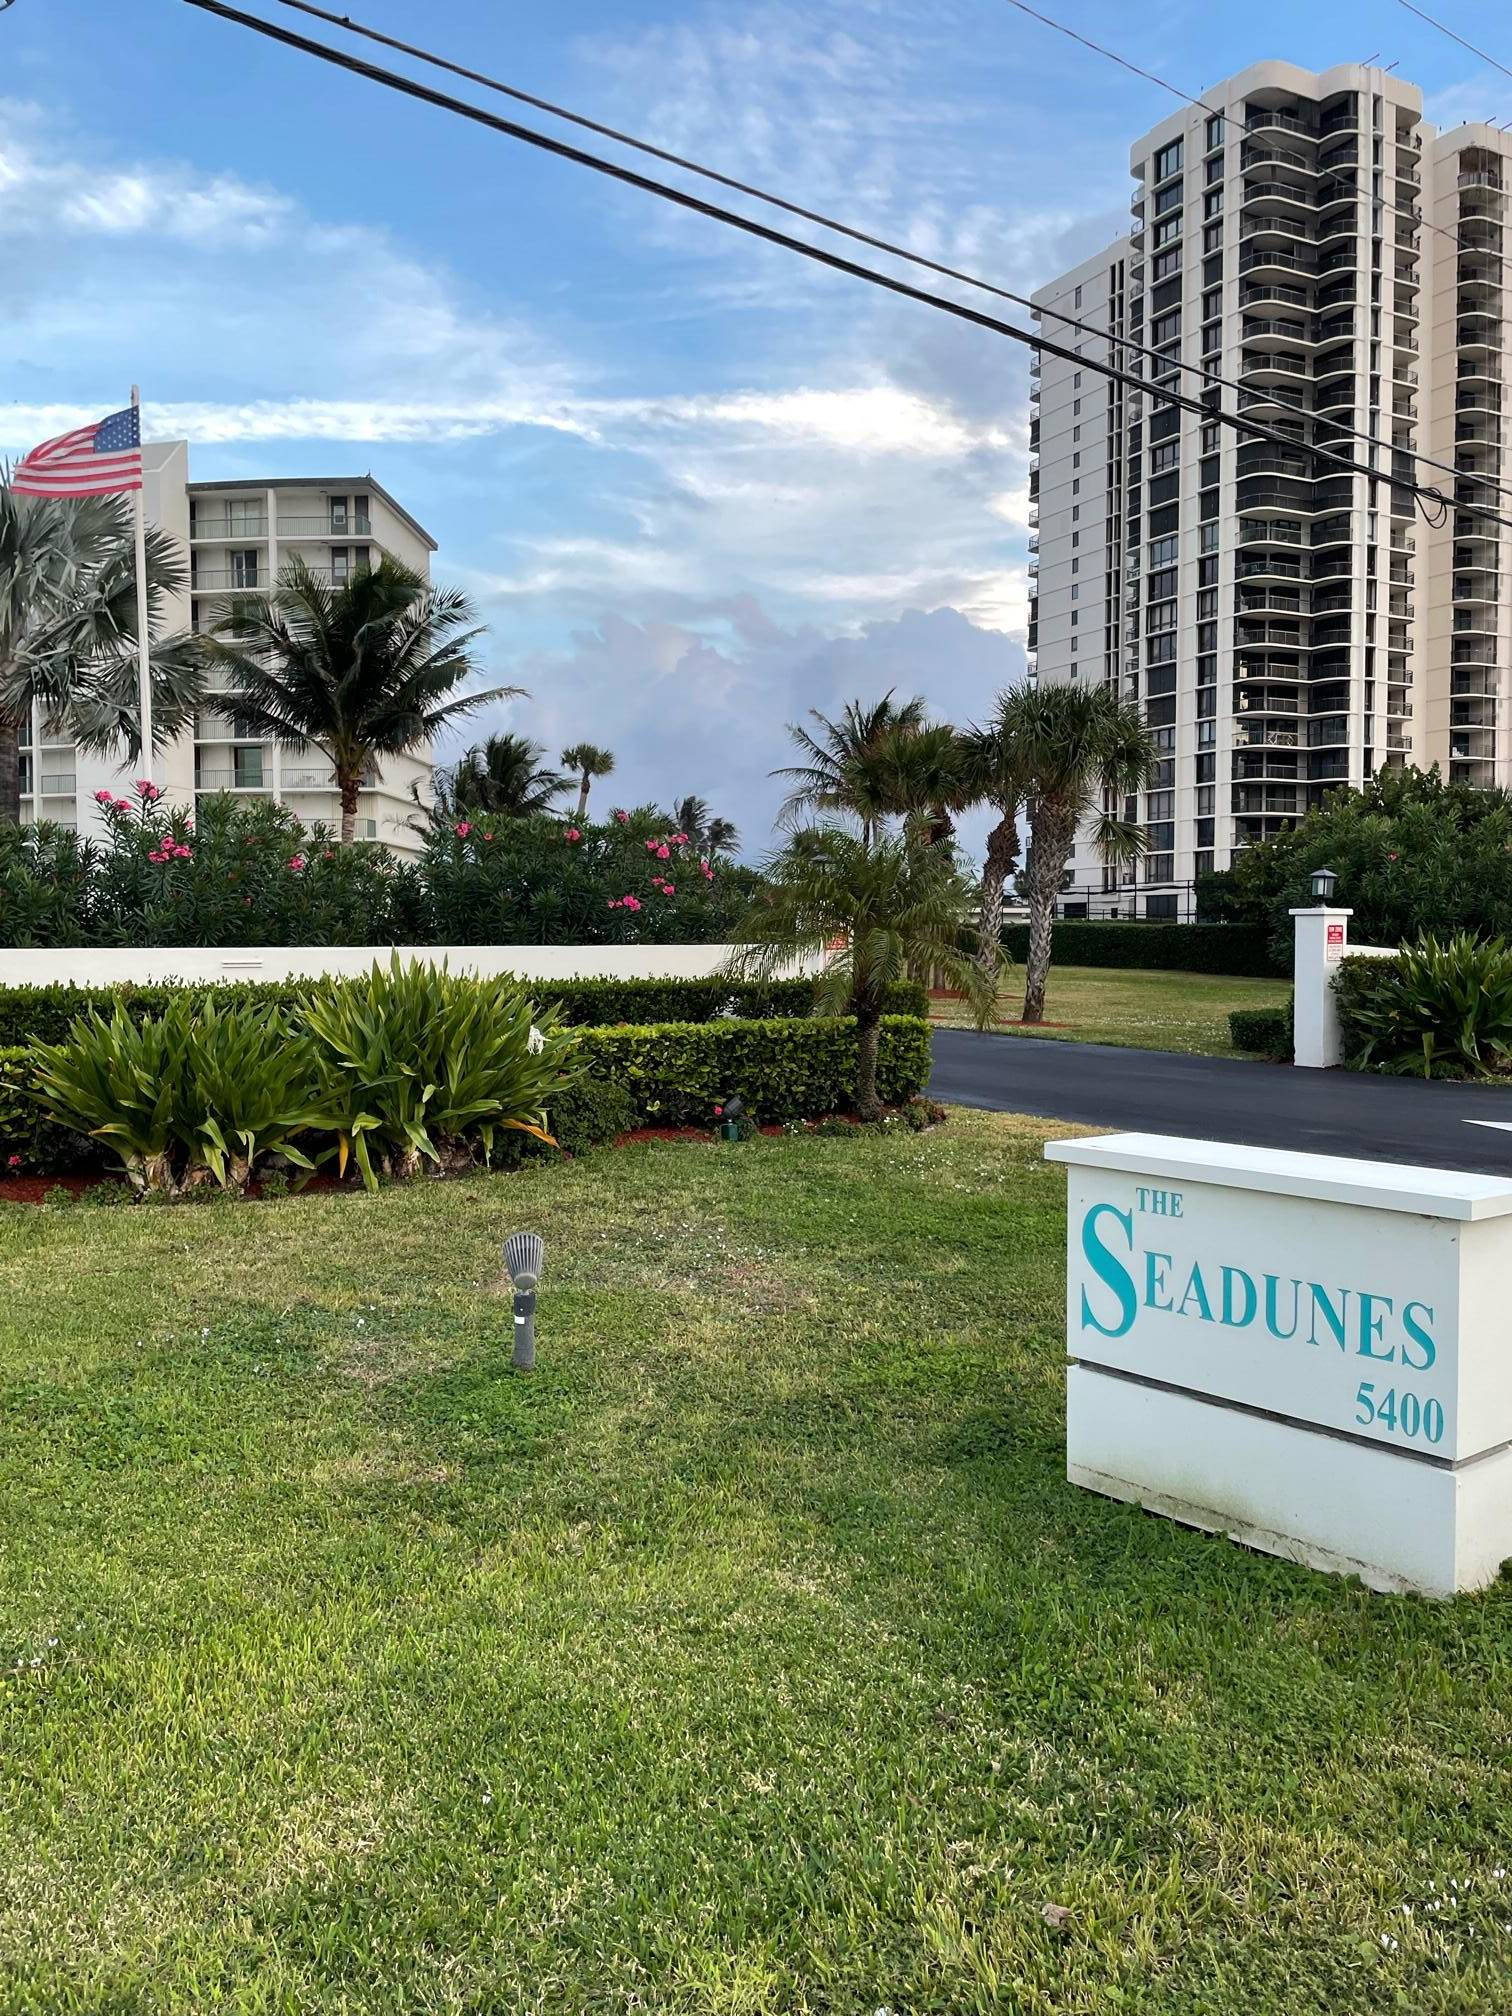 Luxurious Oceanfront Living 2 Bed, 2 Bath Penthouse Condo on Singer Island, Riviera Beach, FloridaEscape to paradise with this exquisite 2 bedroom, 2 bath penthouse condo nestled on the pristine ...